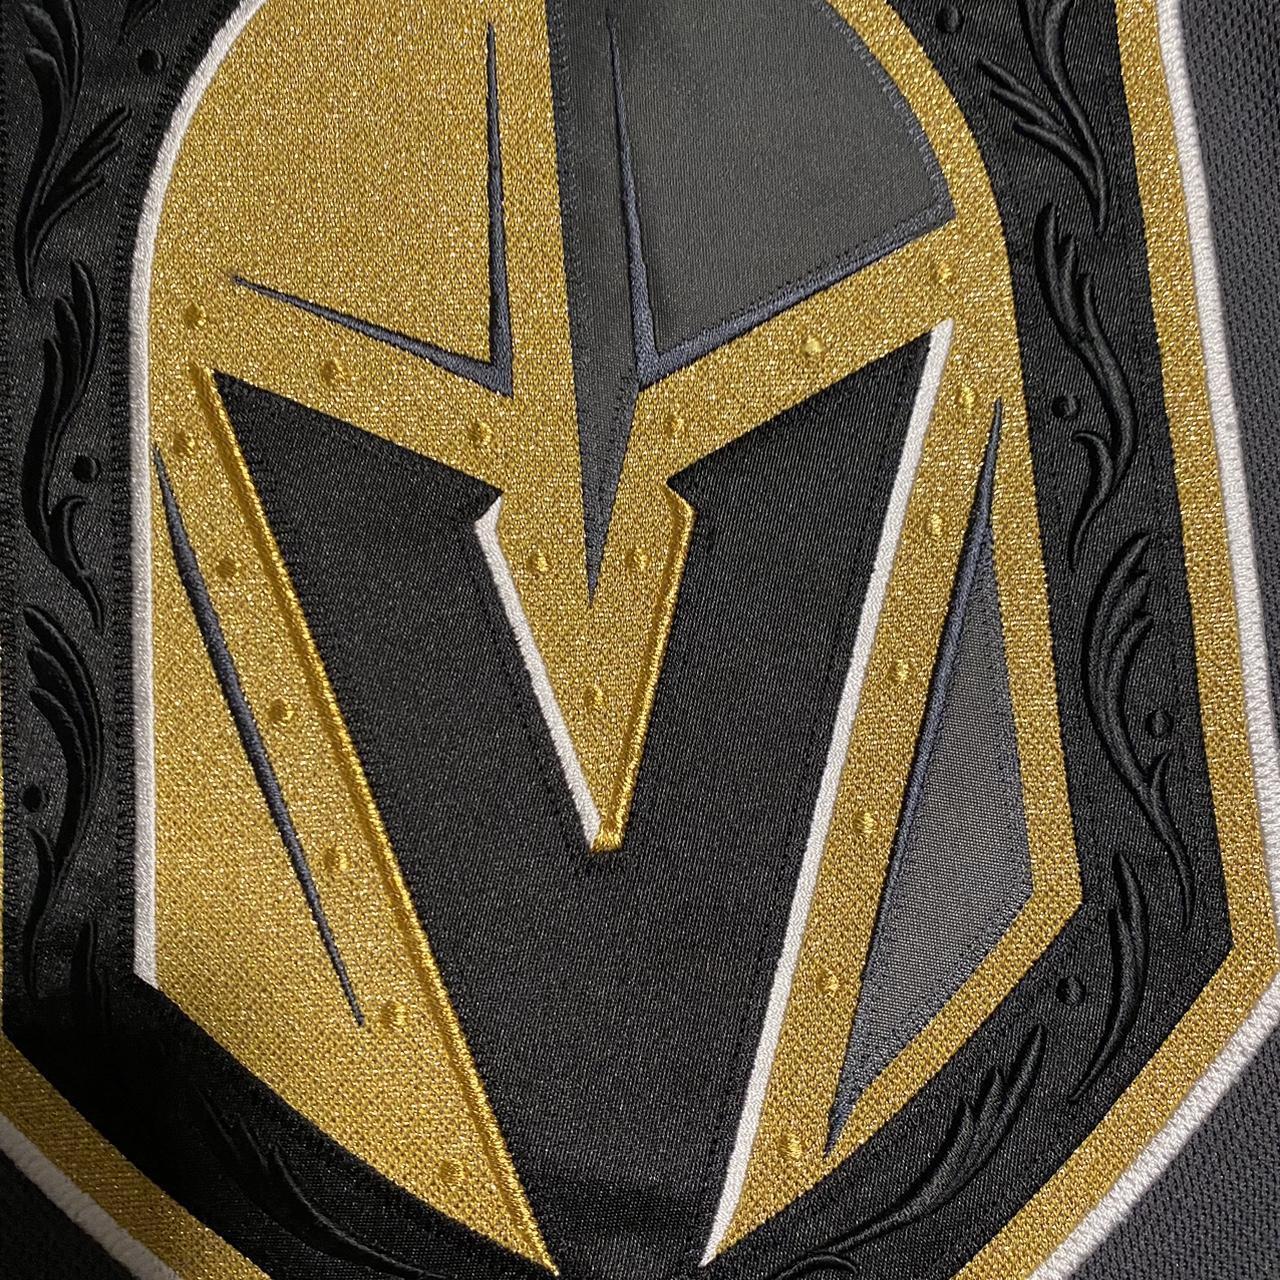 Las Vegas Knights jersey This is a custom made - Depop